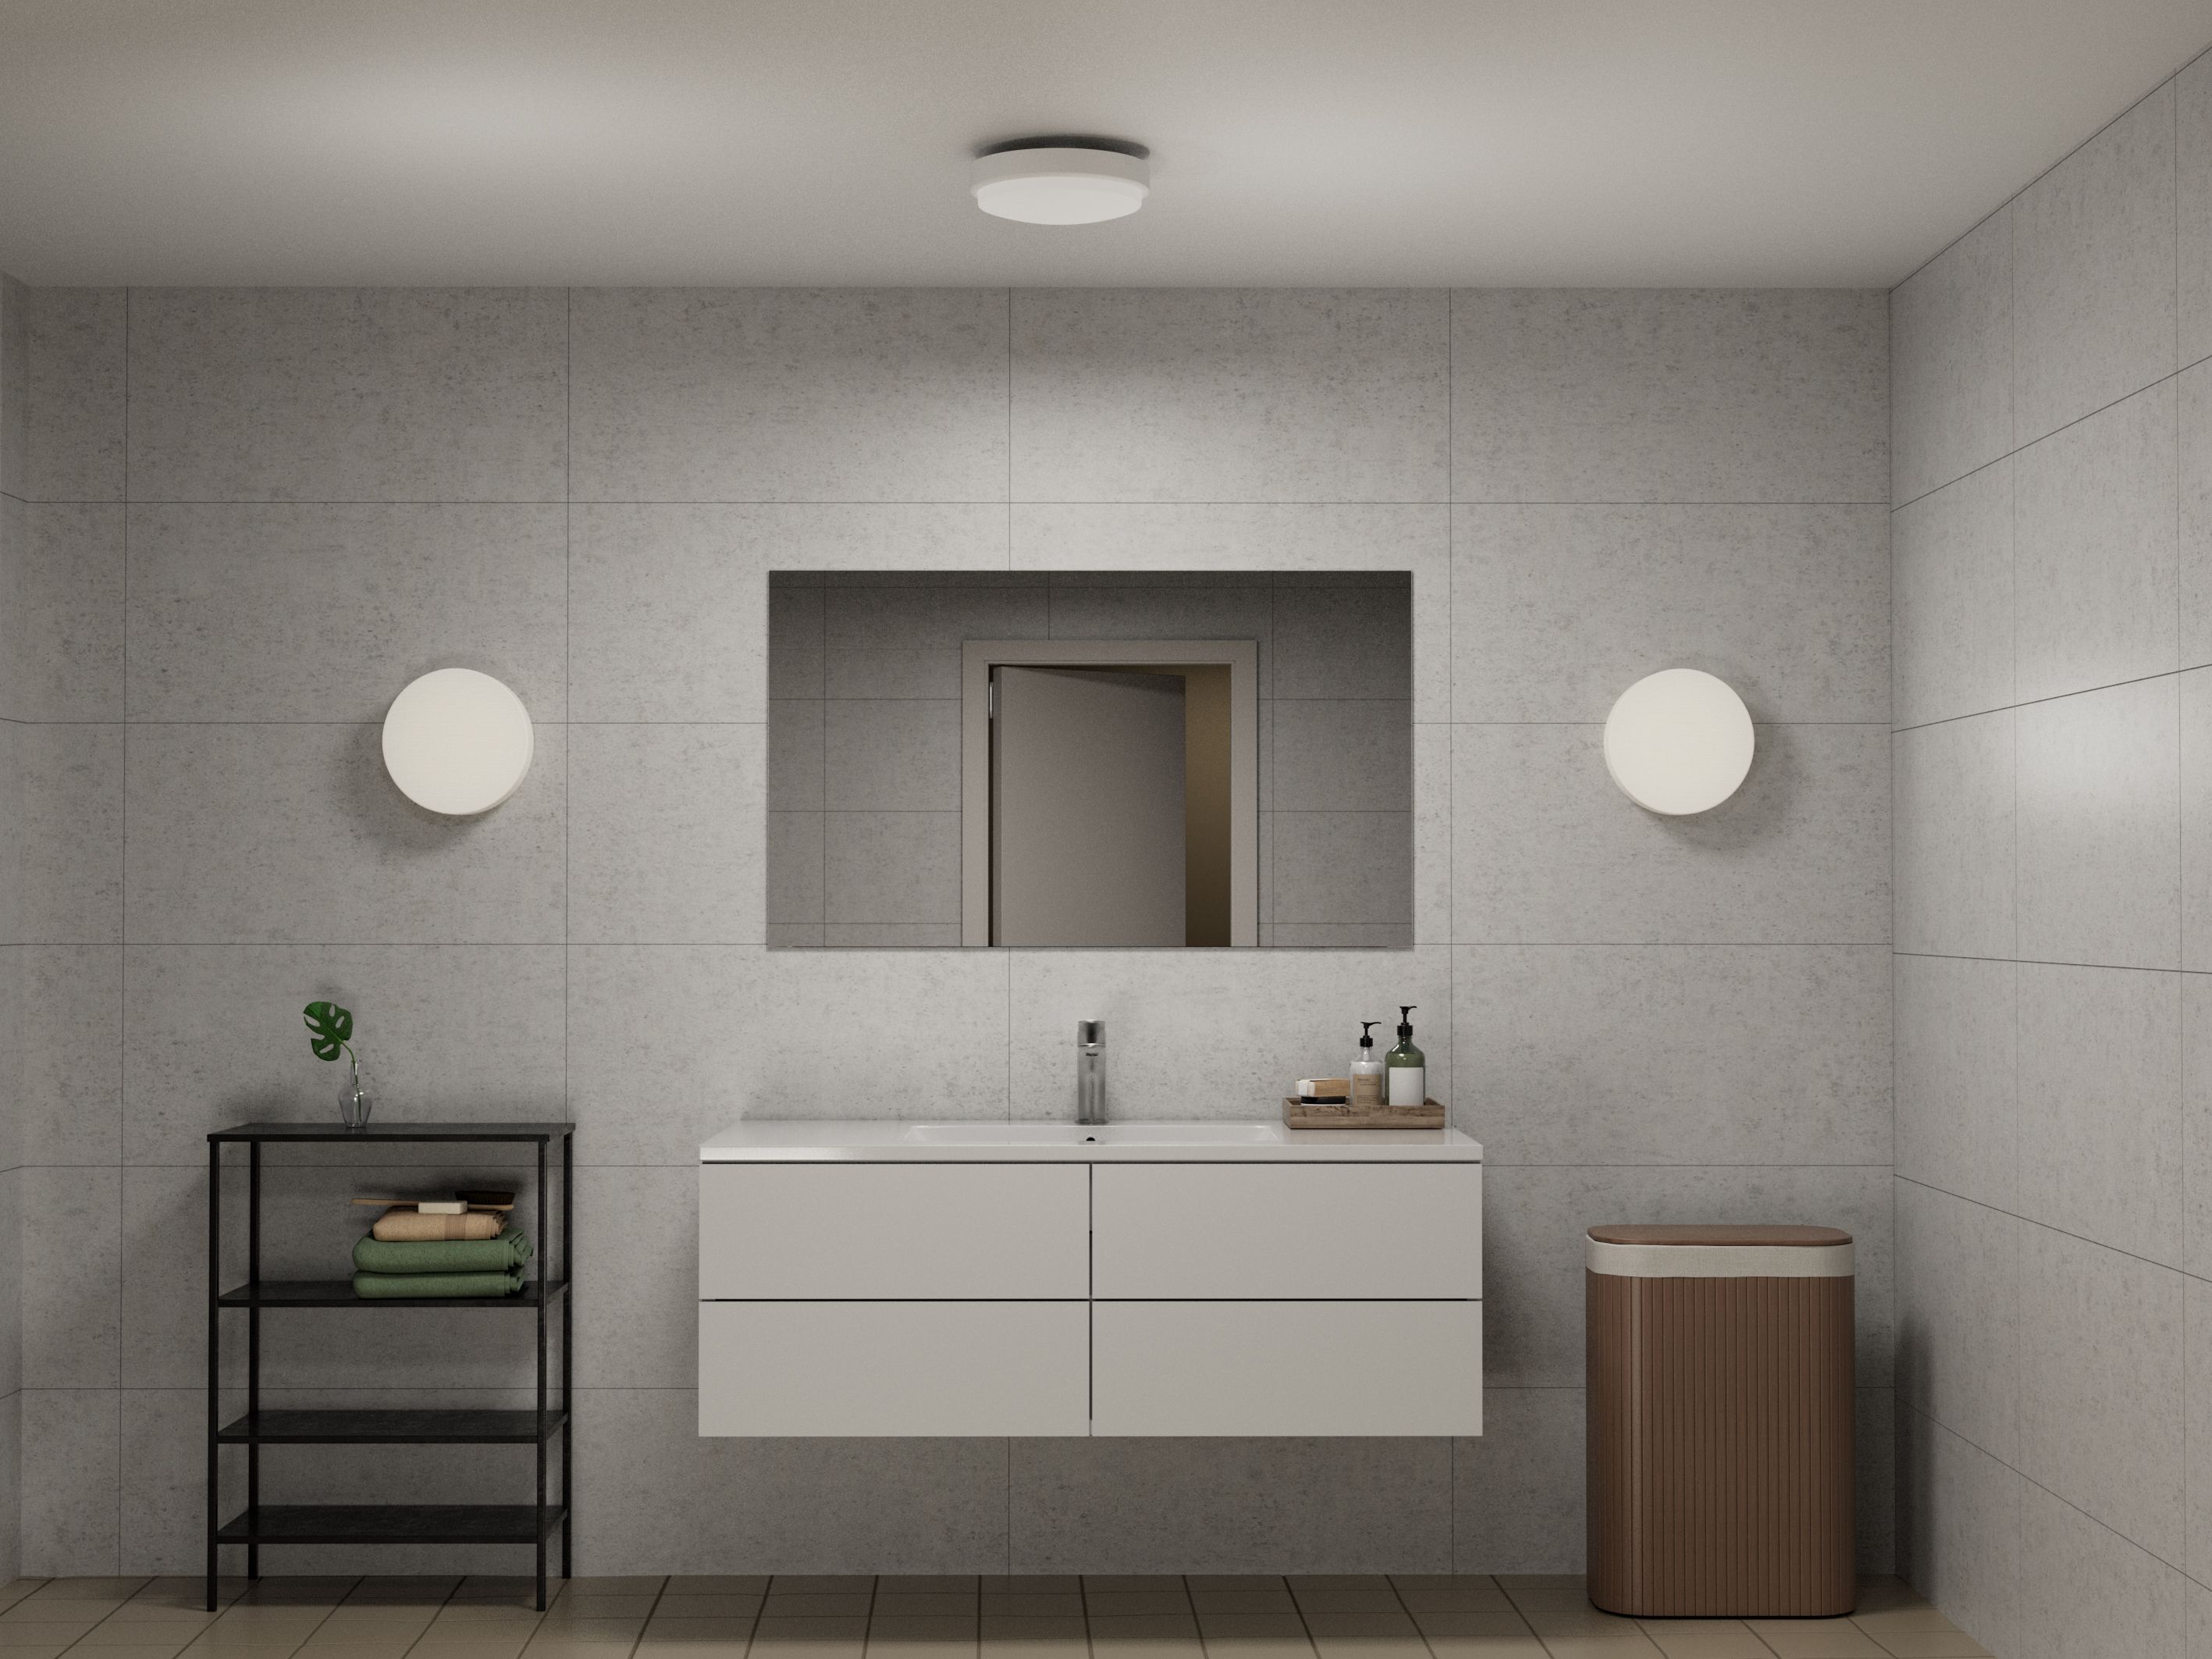 Bathroom lighting with two wall lamps and one ceiling lamp